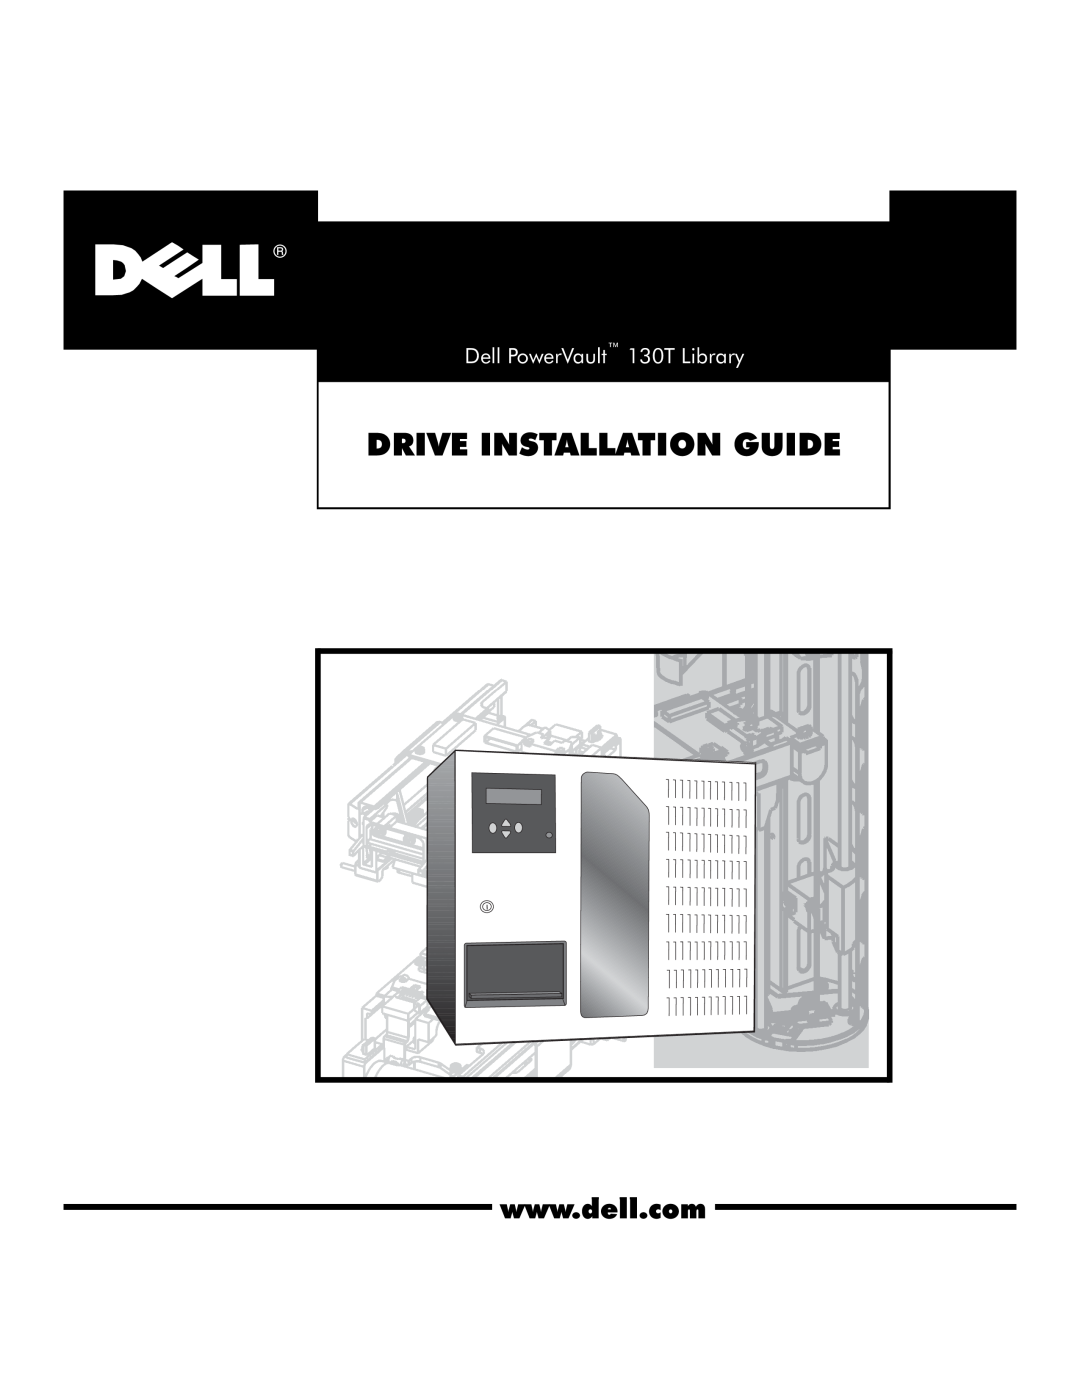 Dell manual Drive Installation Guide, Dell PowerVault 130T Library 